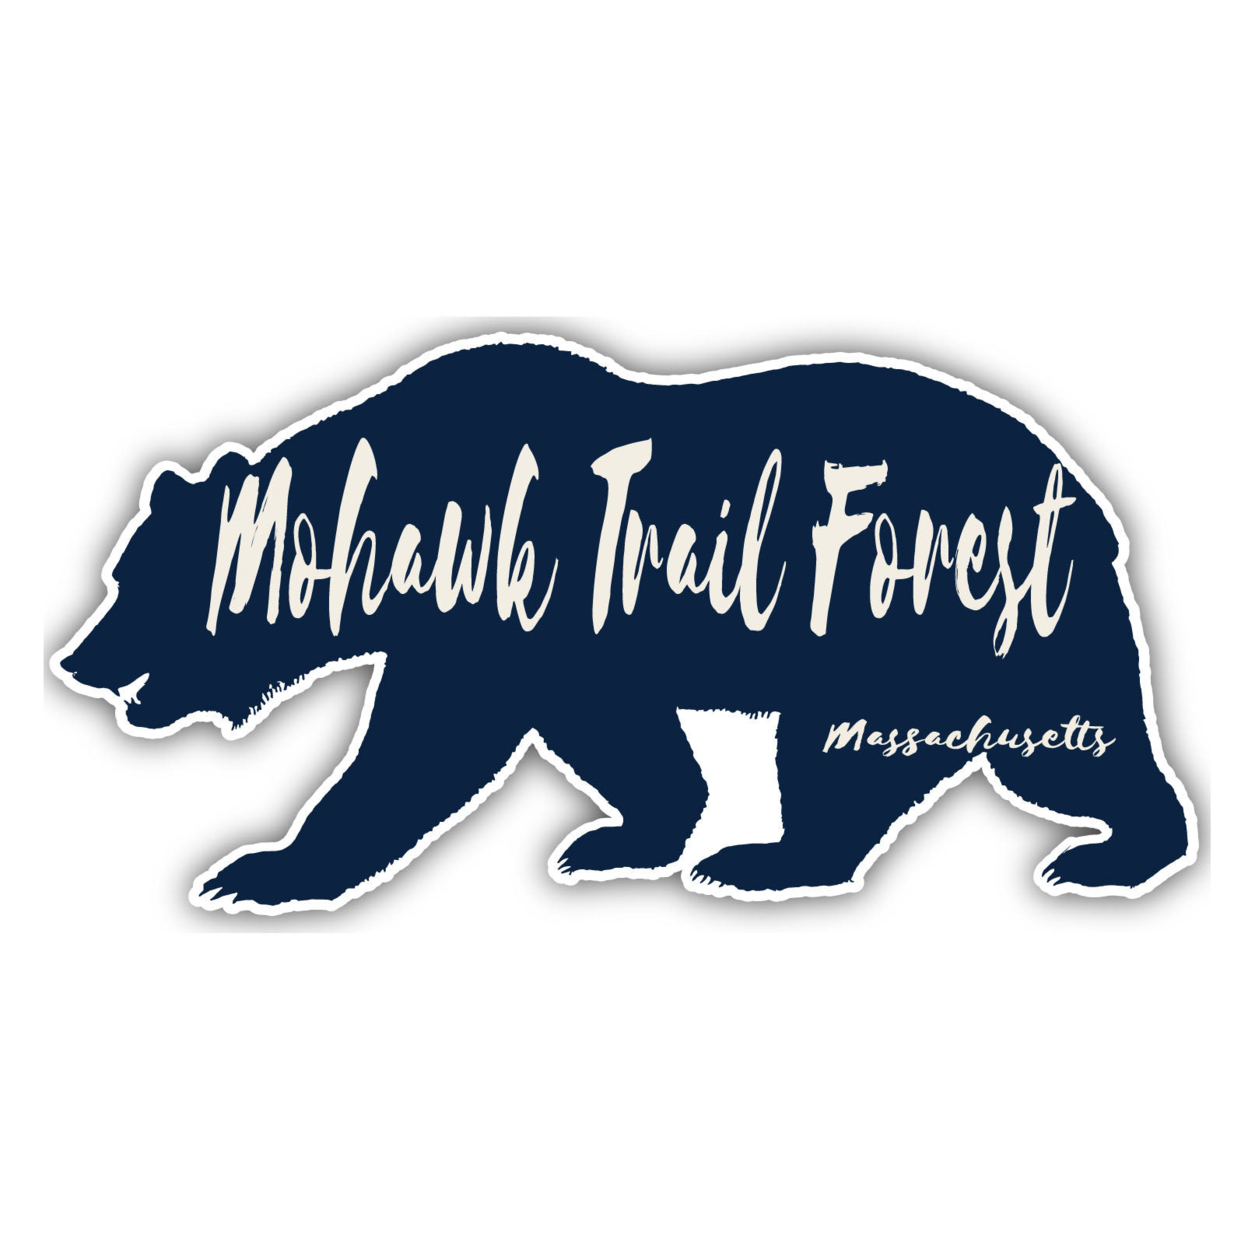 Mohawk Trail Forest Massachusetts Souvenir Decorative Stickers (Choose Theme And Size) - 2-Inch, Bear